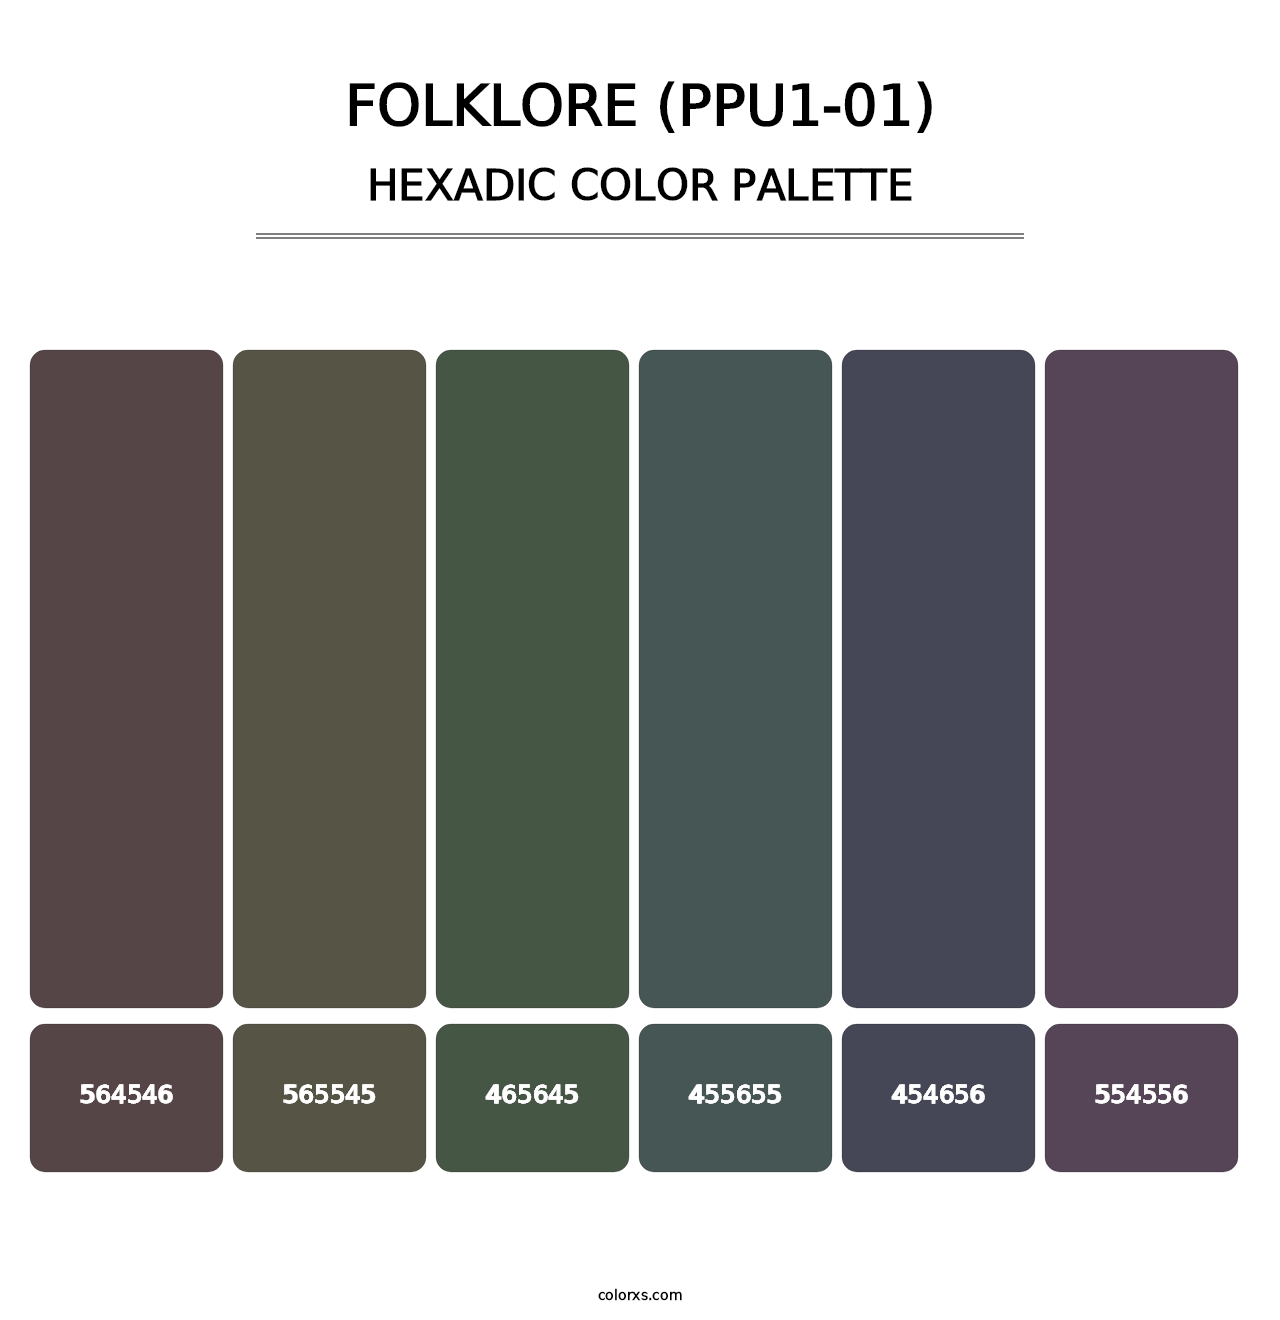 Folklore (PPU1-01) - Hexadic Color Palette